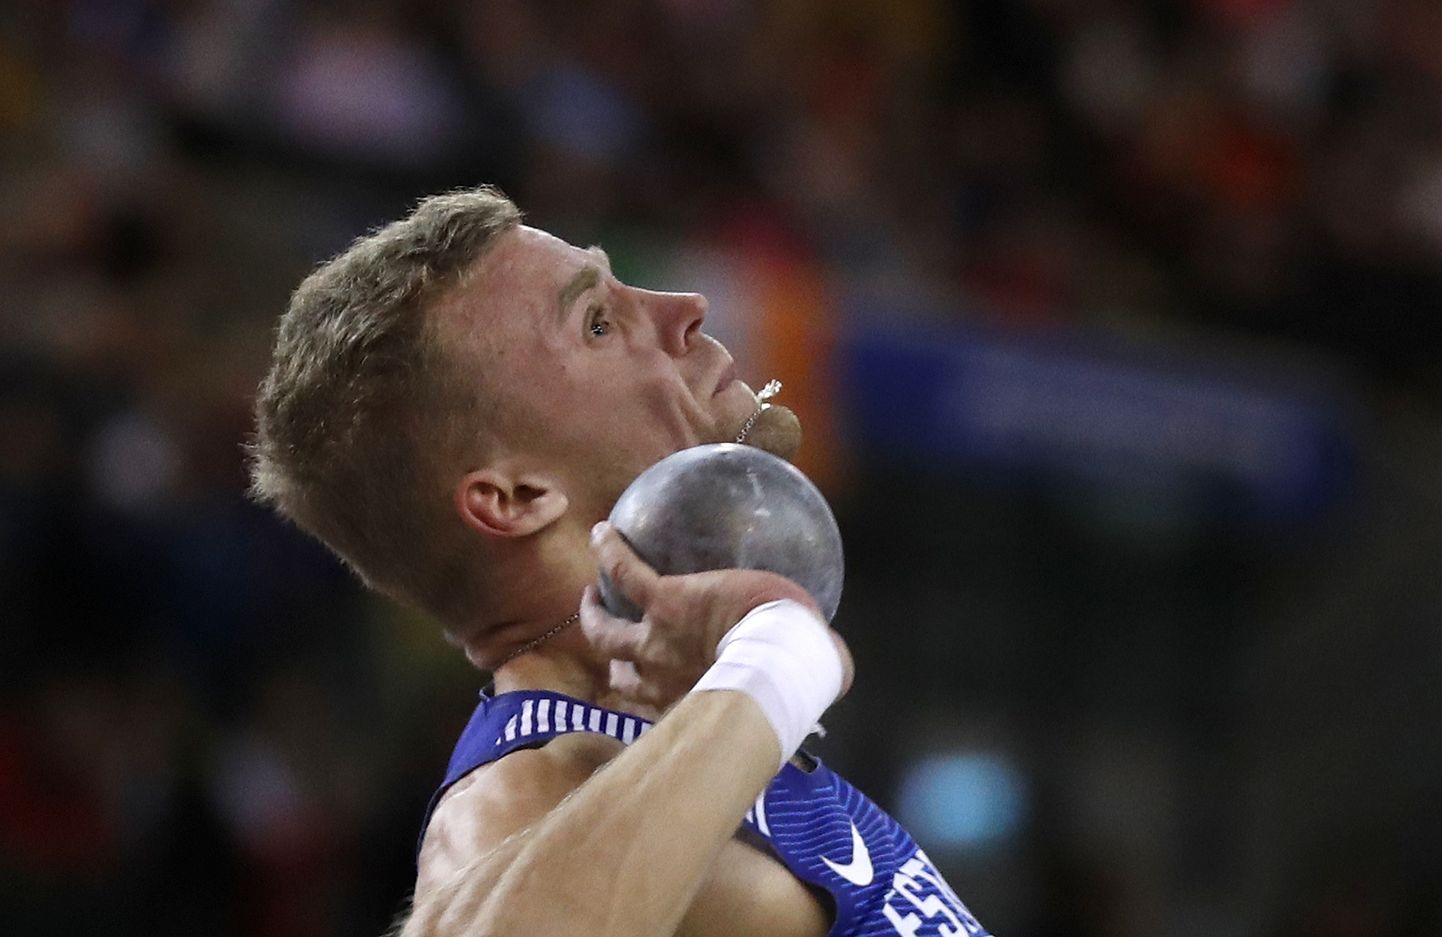 Karl Robert Saluri of Estonia makes an attempt in the shot put of the heptathlon at the European Athletics Indoor Championships at the Emirates Arena in Glasgow, Scotland, Saturday, March 2, 2019. (AP Photo/Alastair Grant)